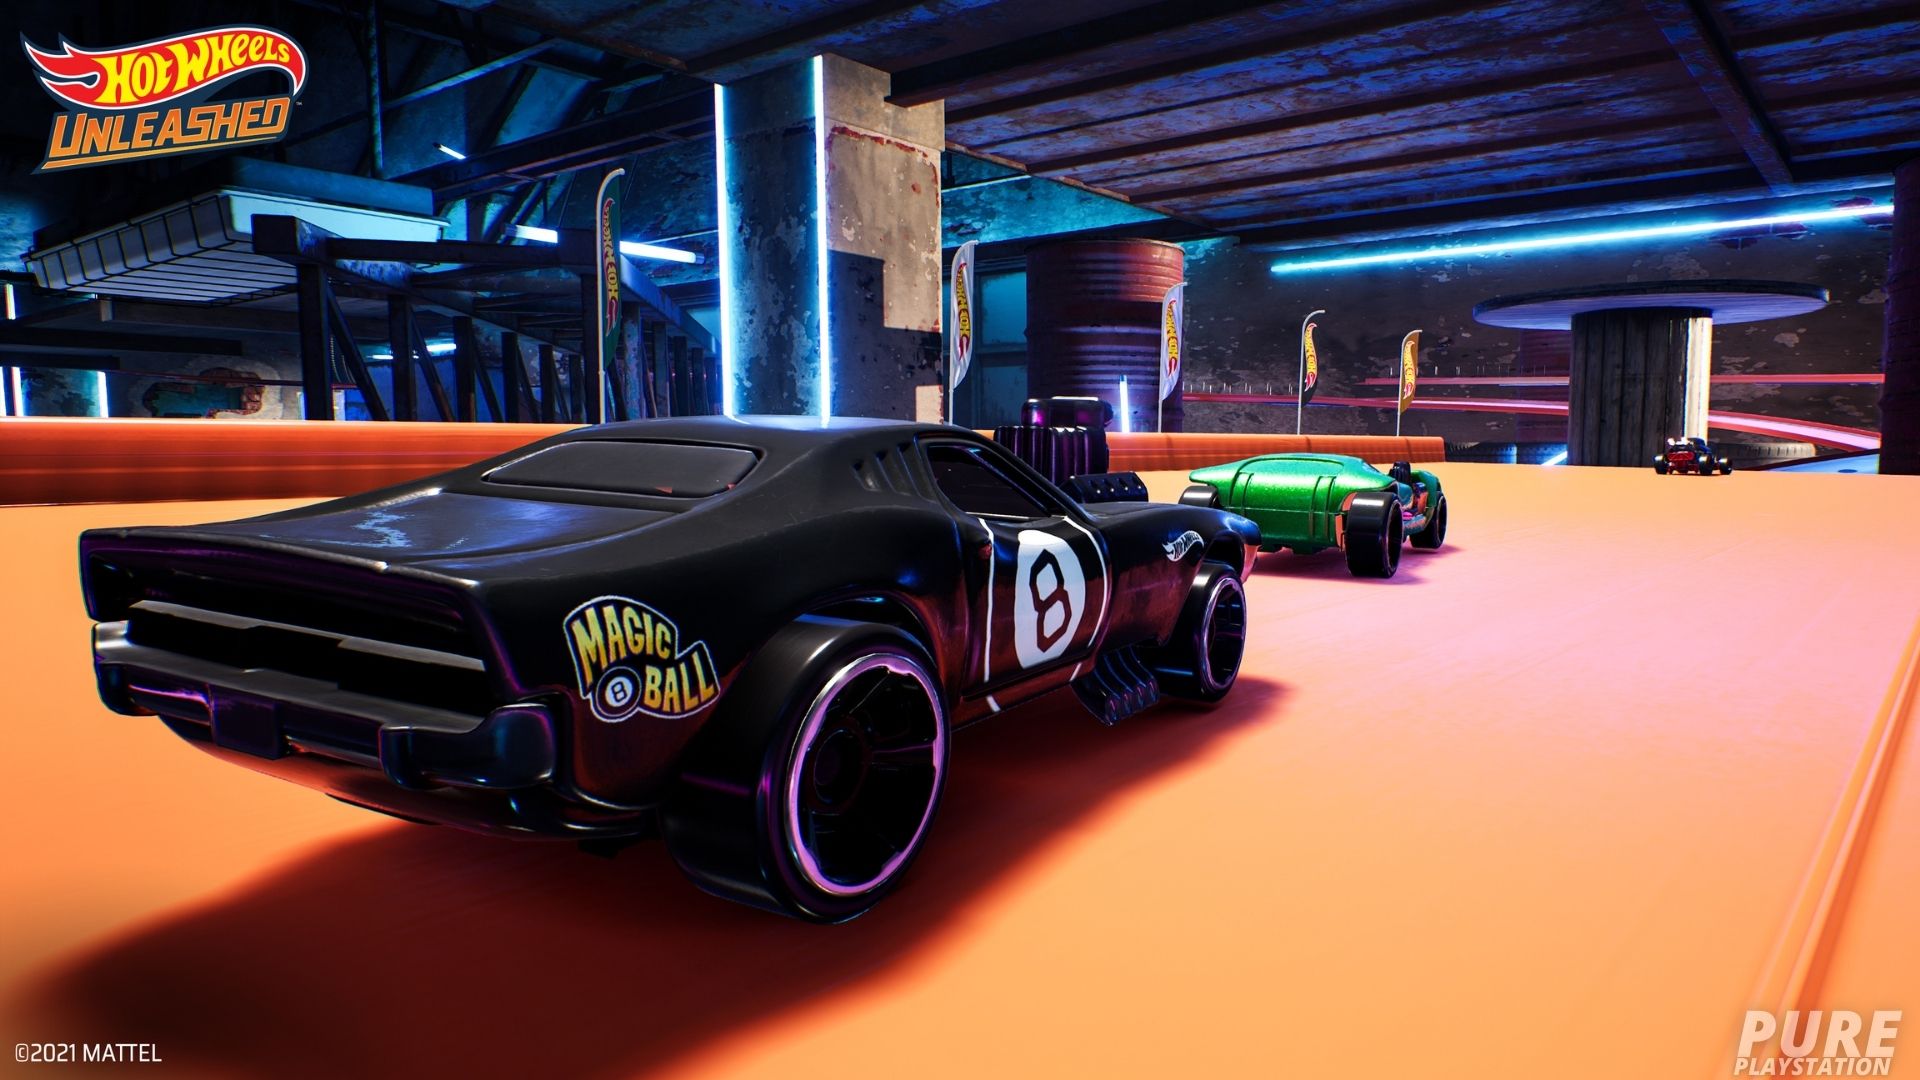 Guide: How to Unlock Legendary Cars and Get Coins in Hot Wheels Unleashed